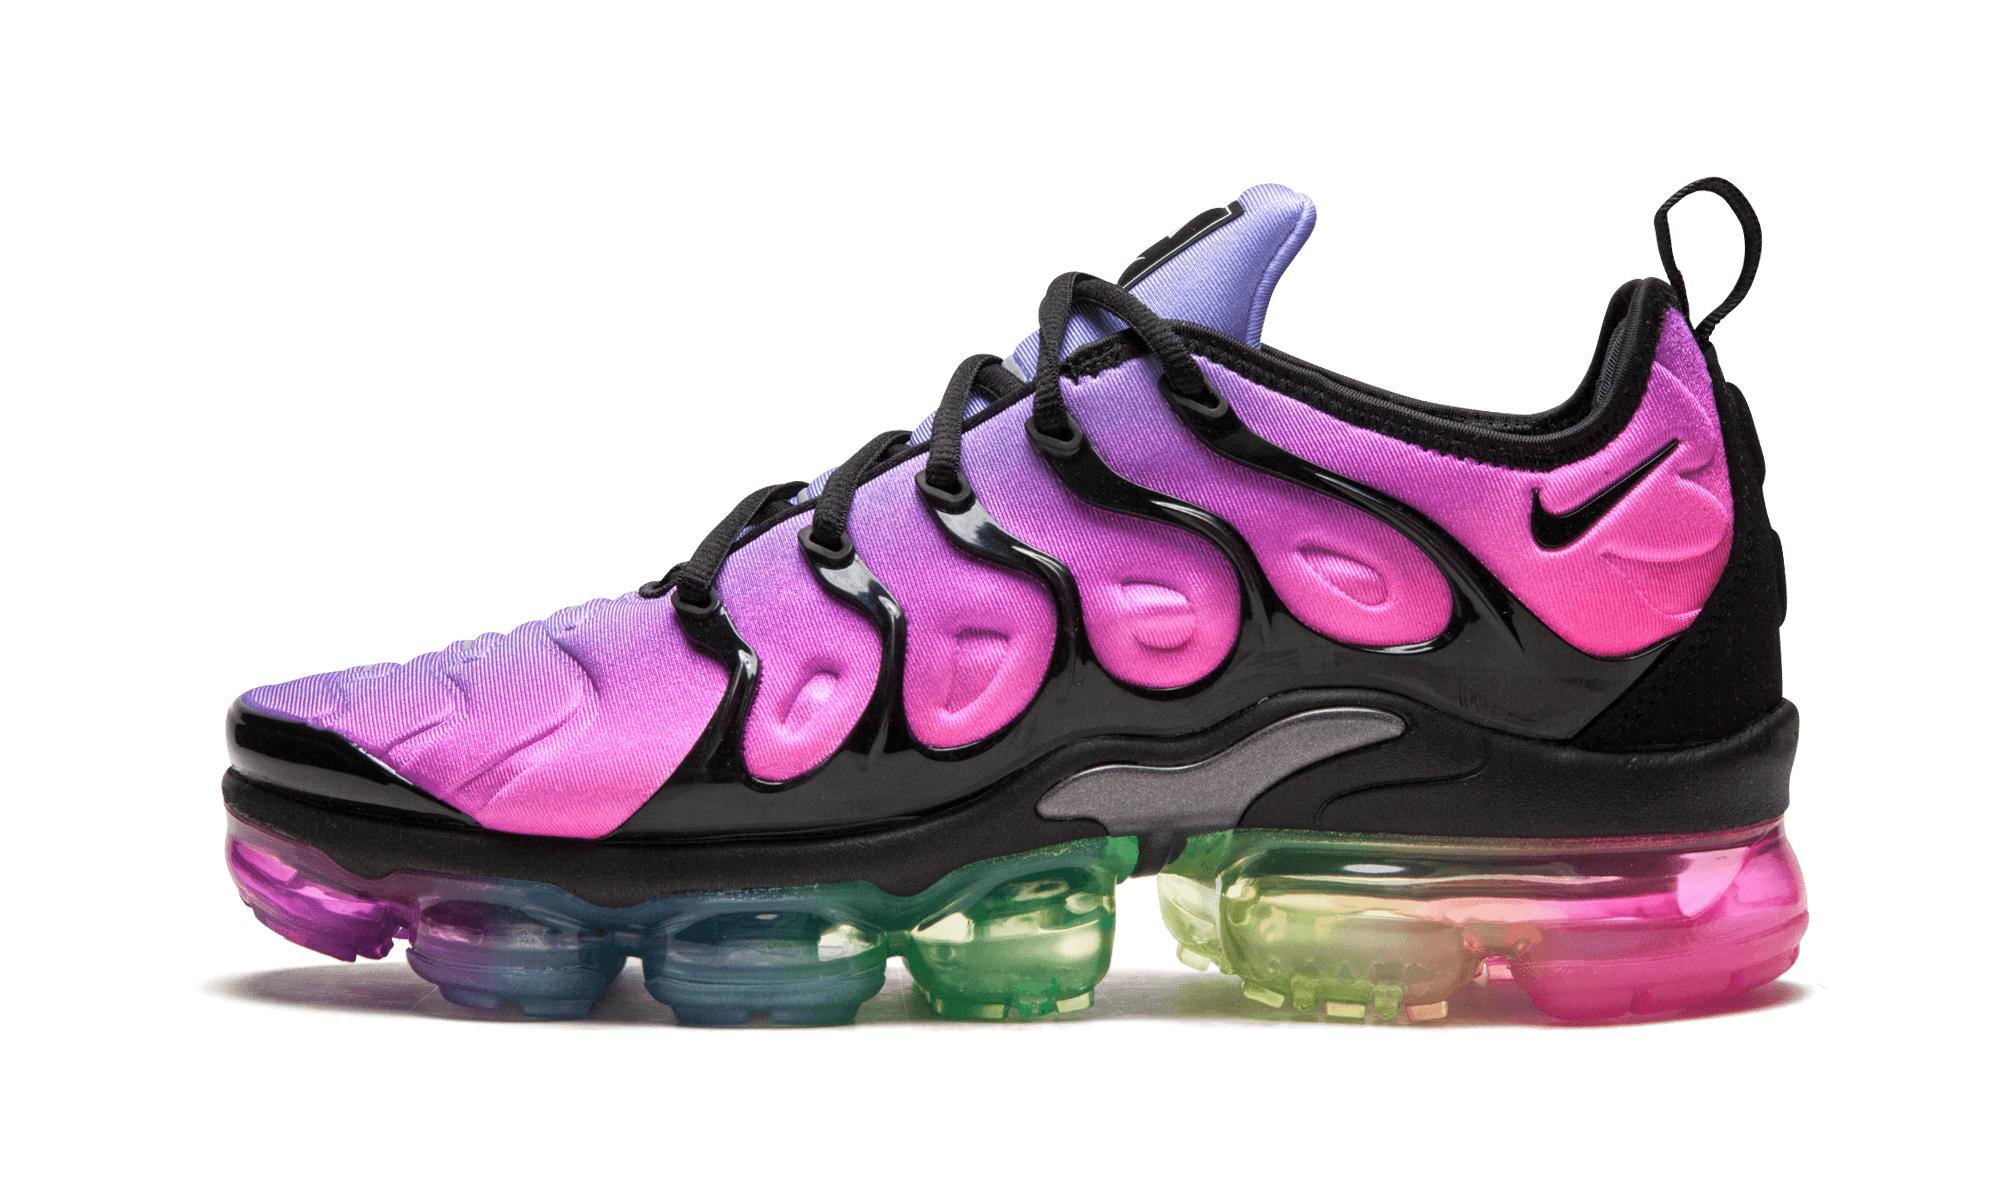 Nike VaporMax Plus Hot Pink for Sale in Houston TX OfferUp